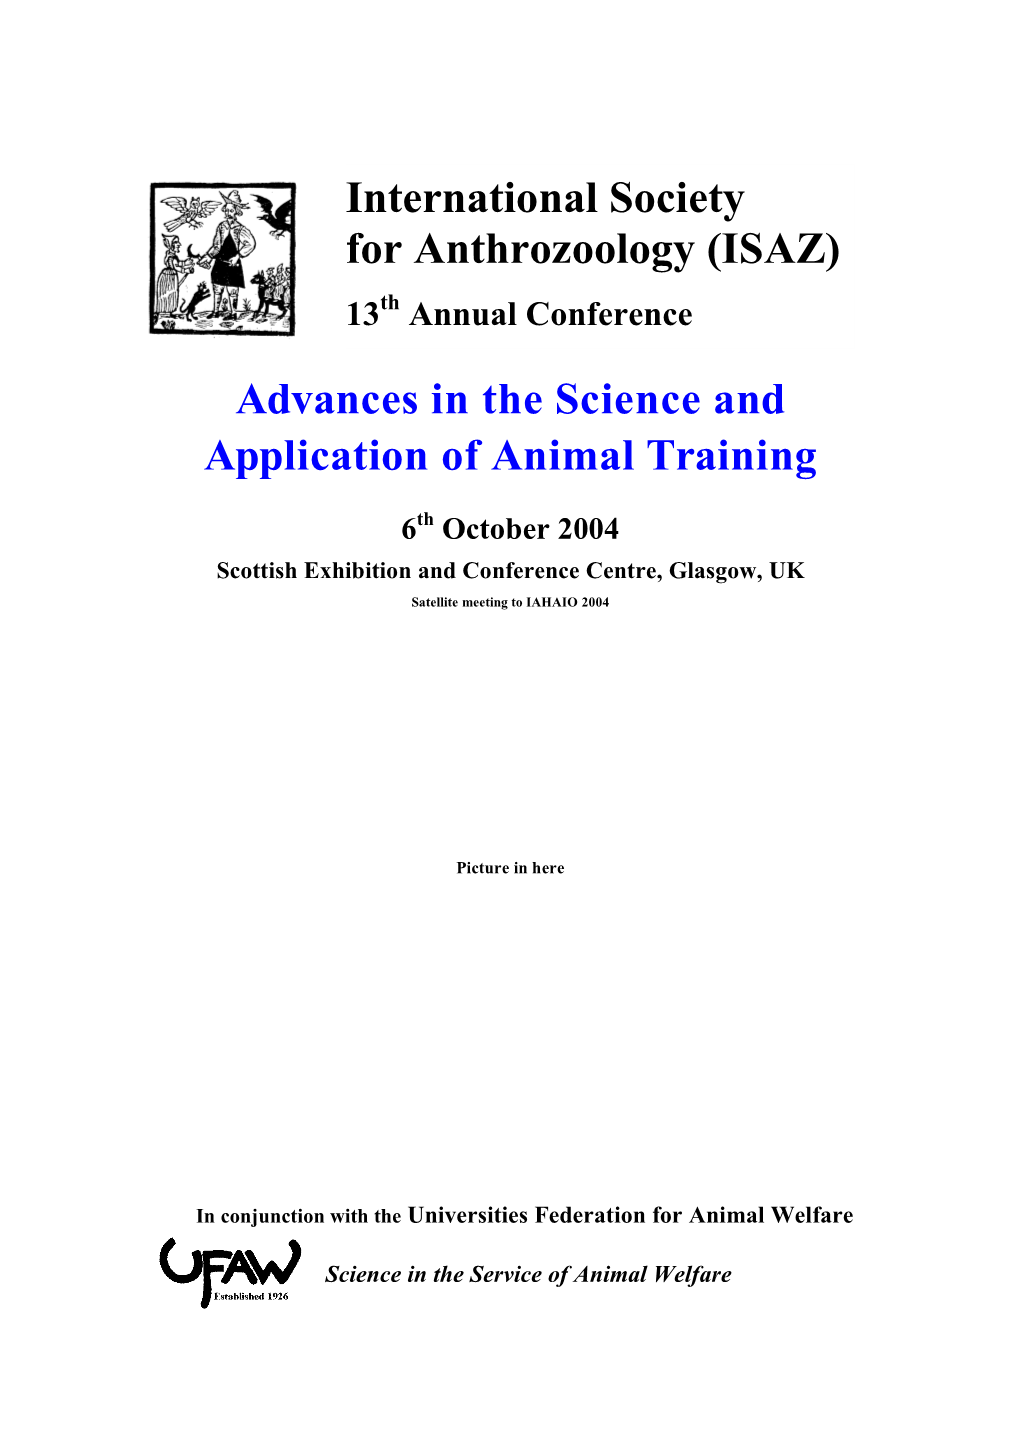 Advances in the Science and Application of Animal Training International Society for Anthrozoology (ISAZ)